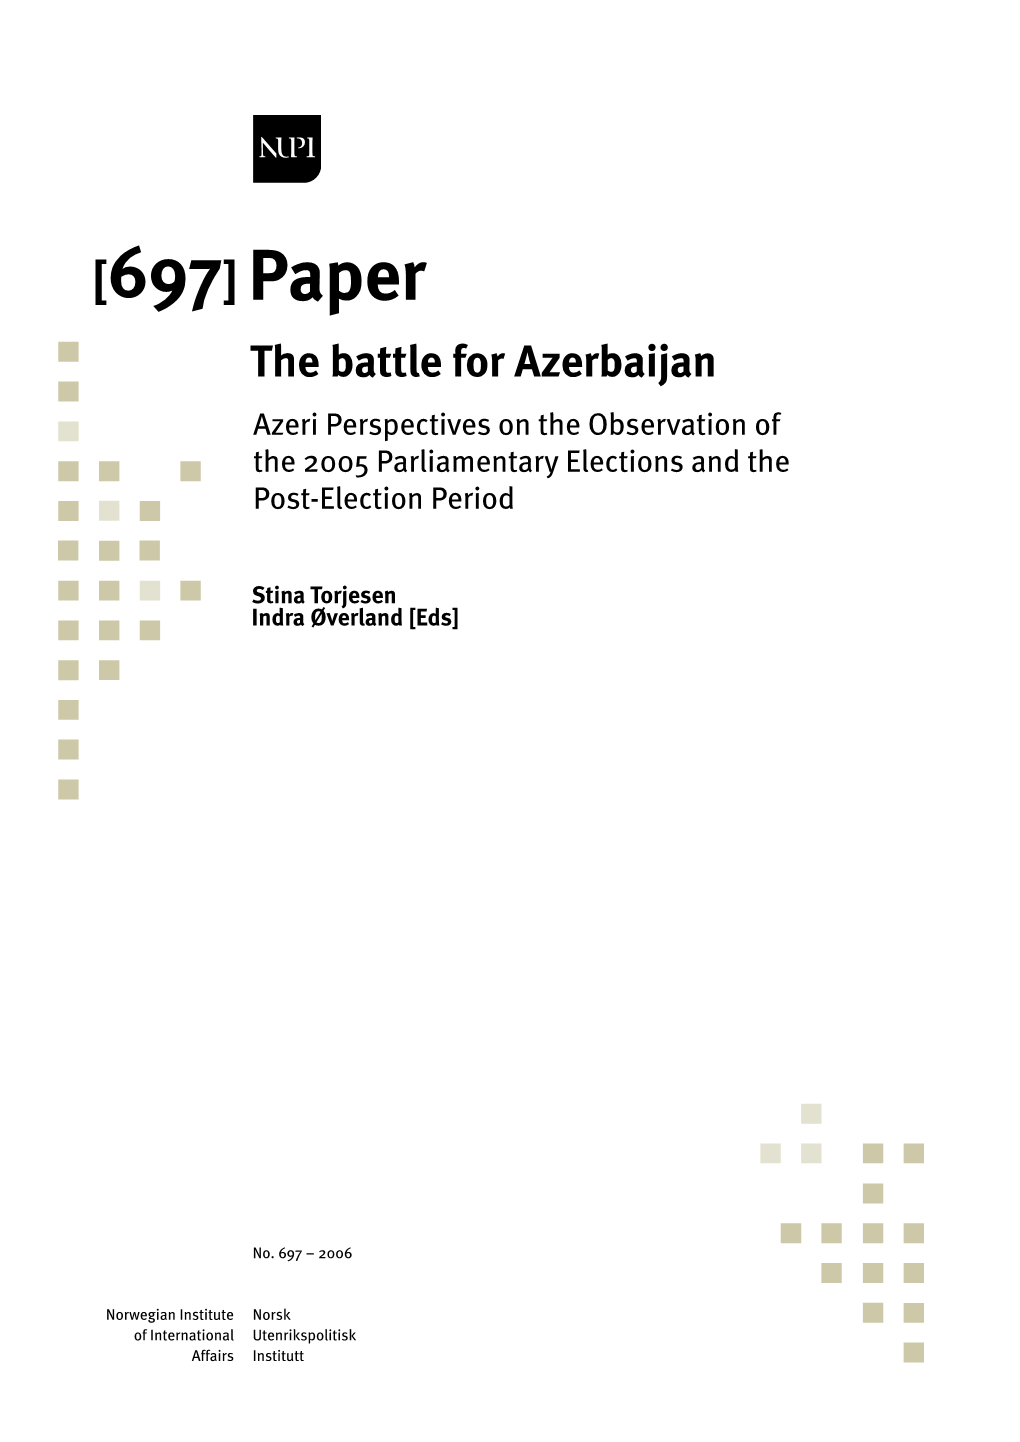 [697] Paper the Battle for Azerbaijan Azeri Perspectives on the Observation of the 2005 Parliamentary Elections and the Post-Election Period